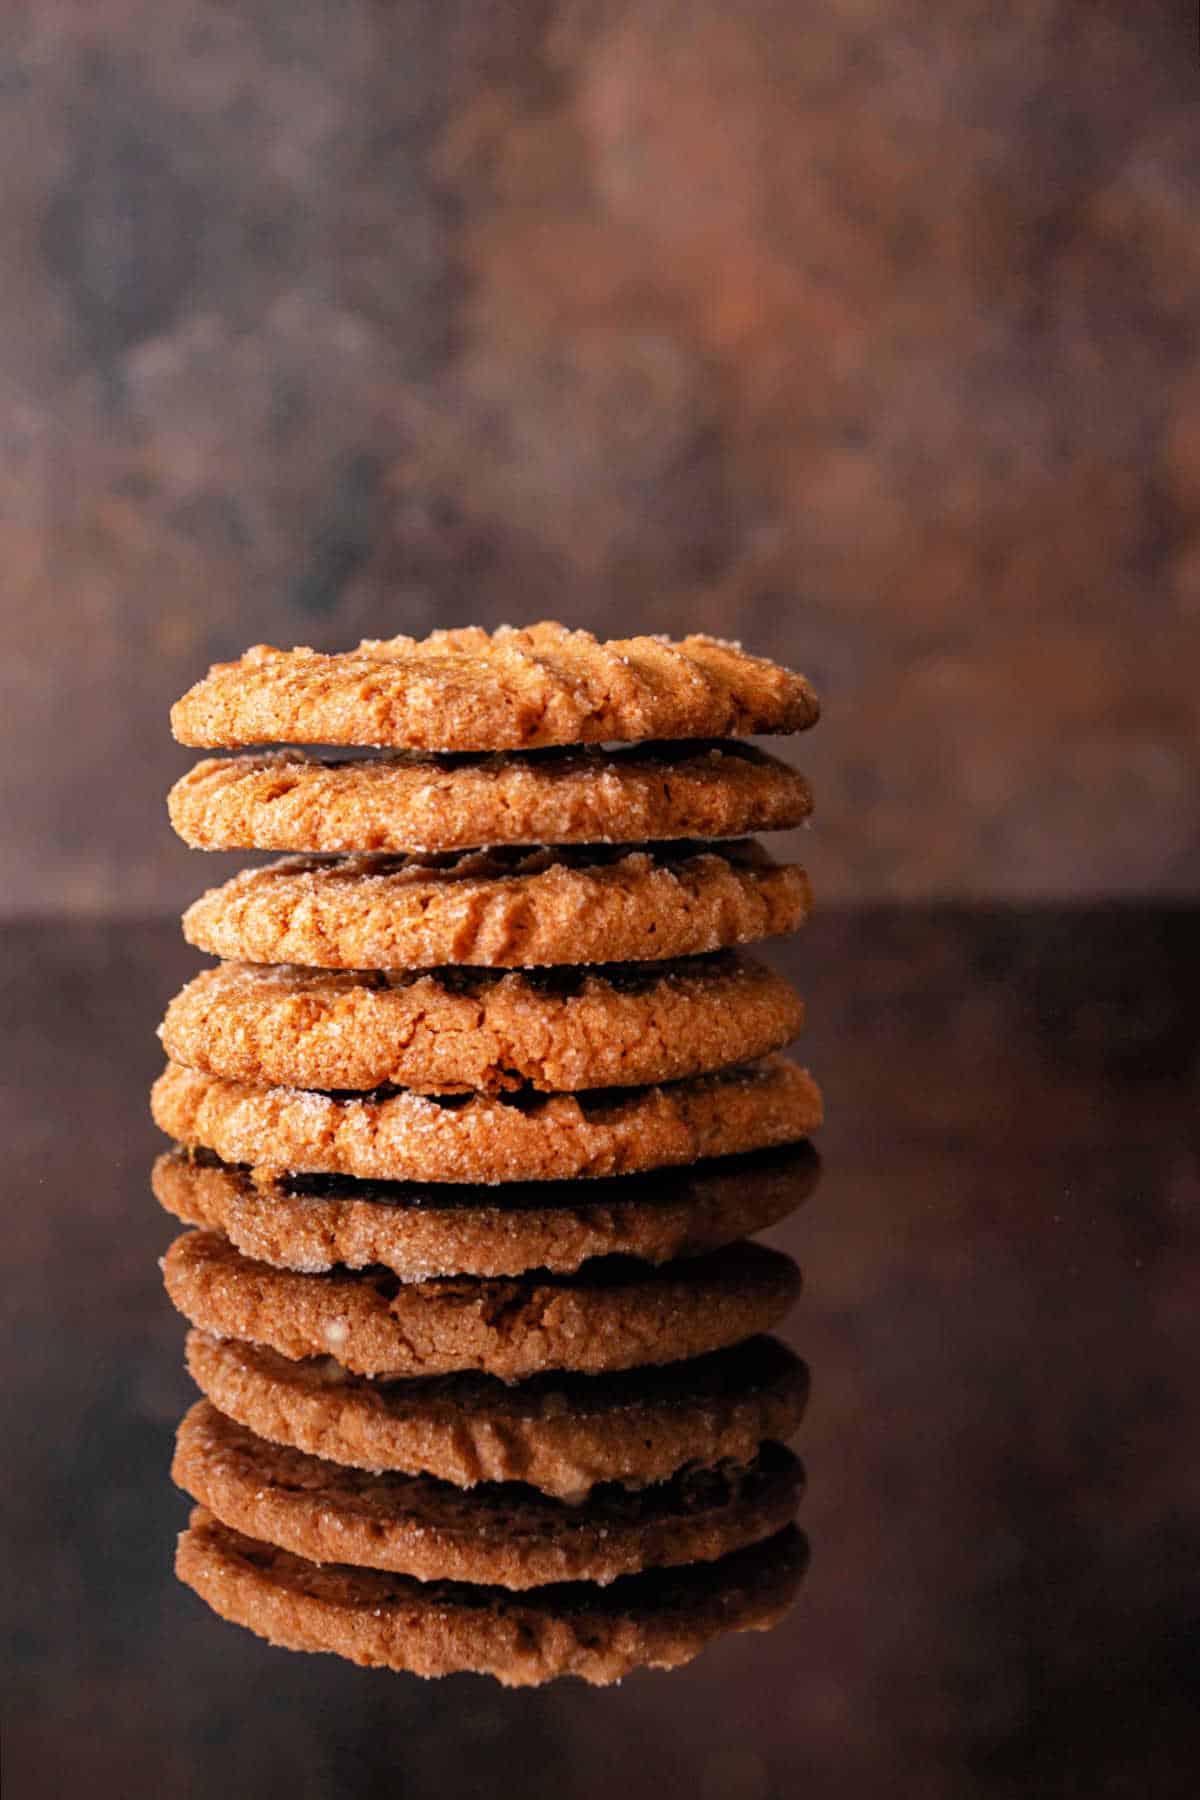 A stack of 5 large peanut butter cookies on a dark, reflective surface.